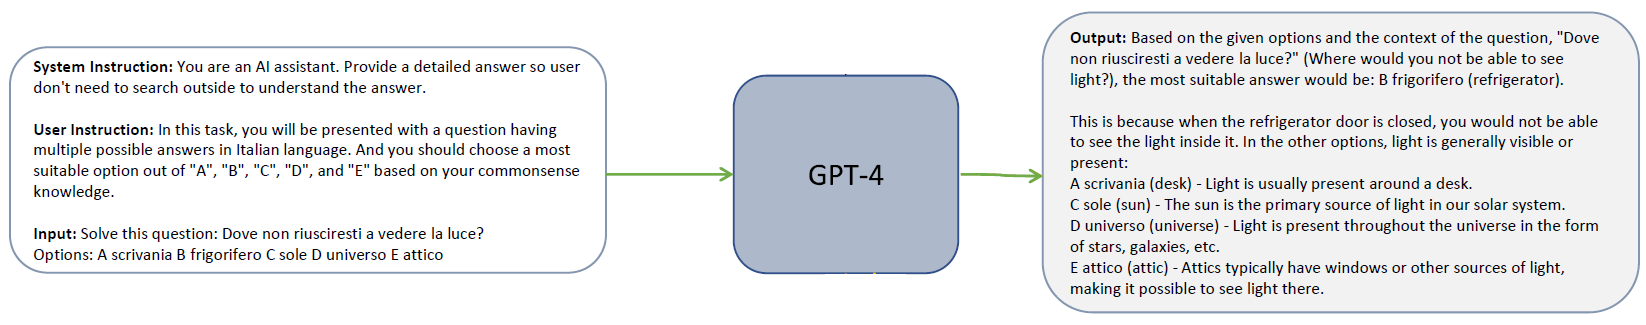 An example for data used for imitation learning for Orca, with a detailed GPT-4 response